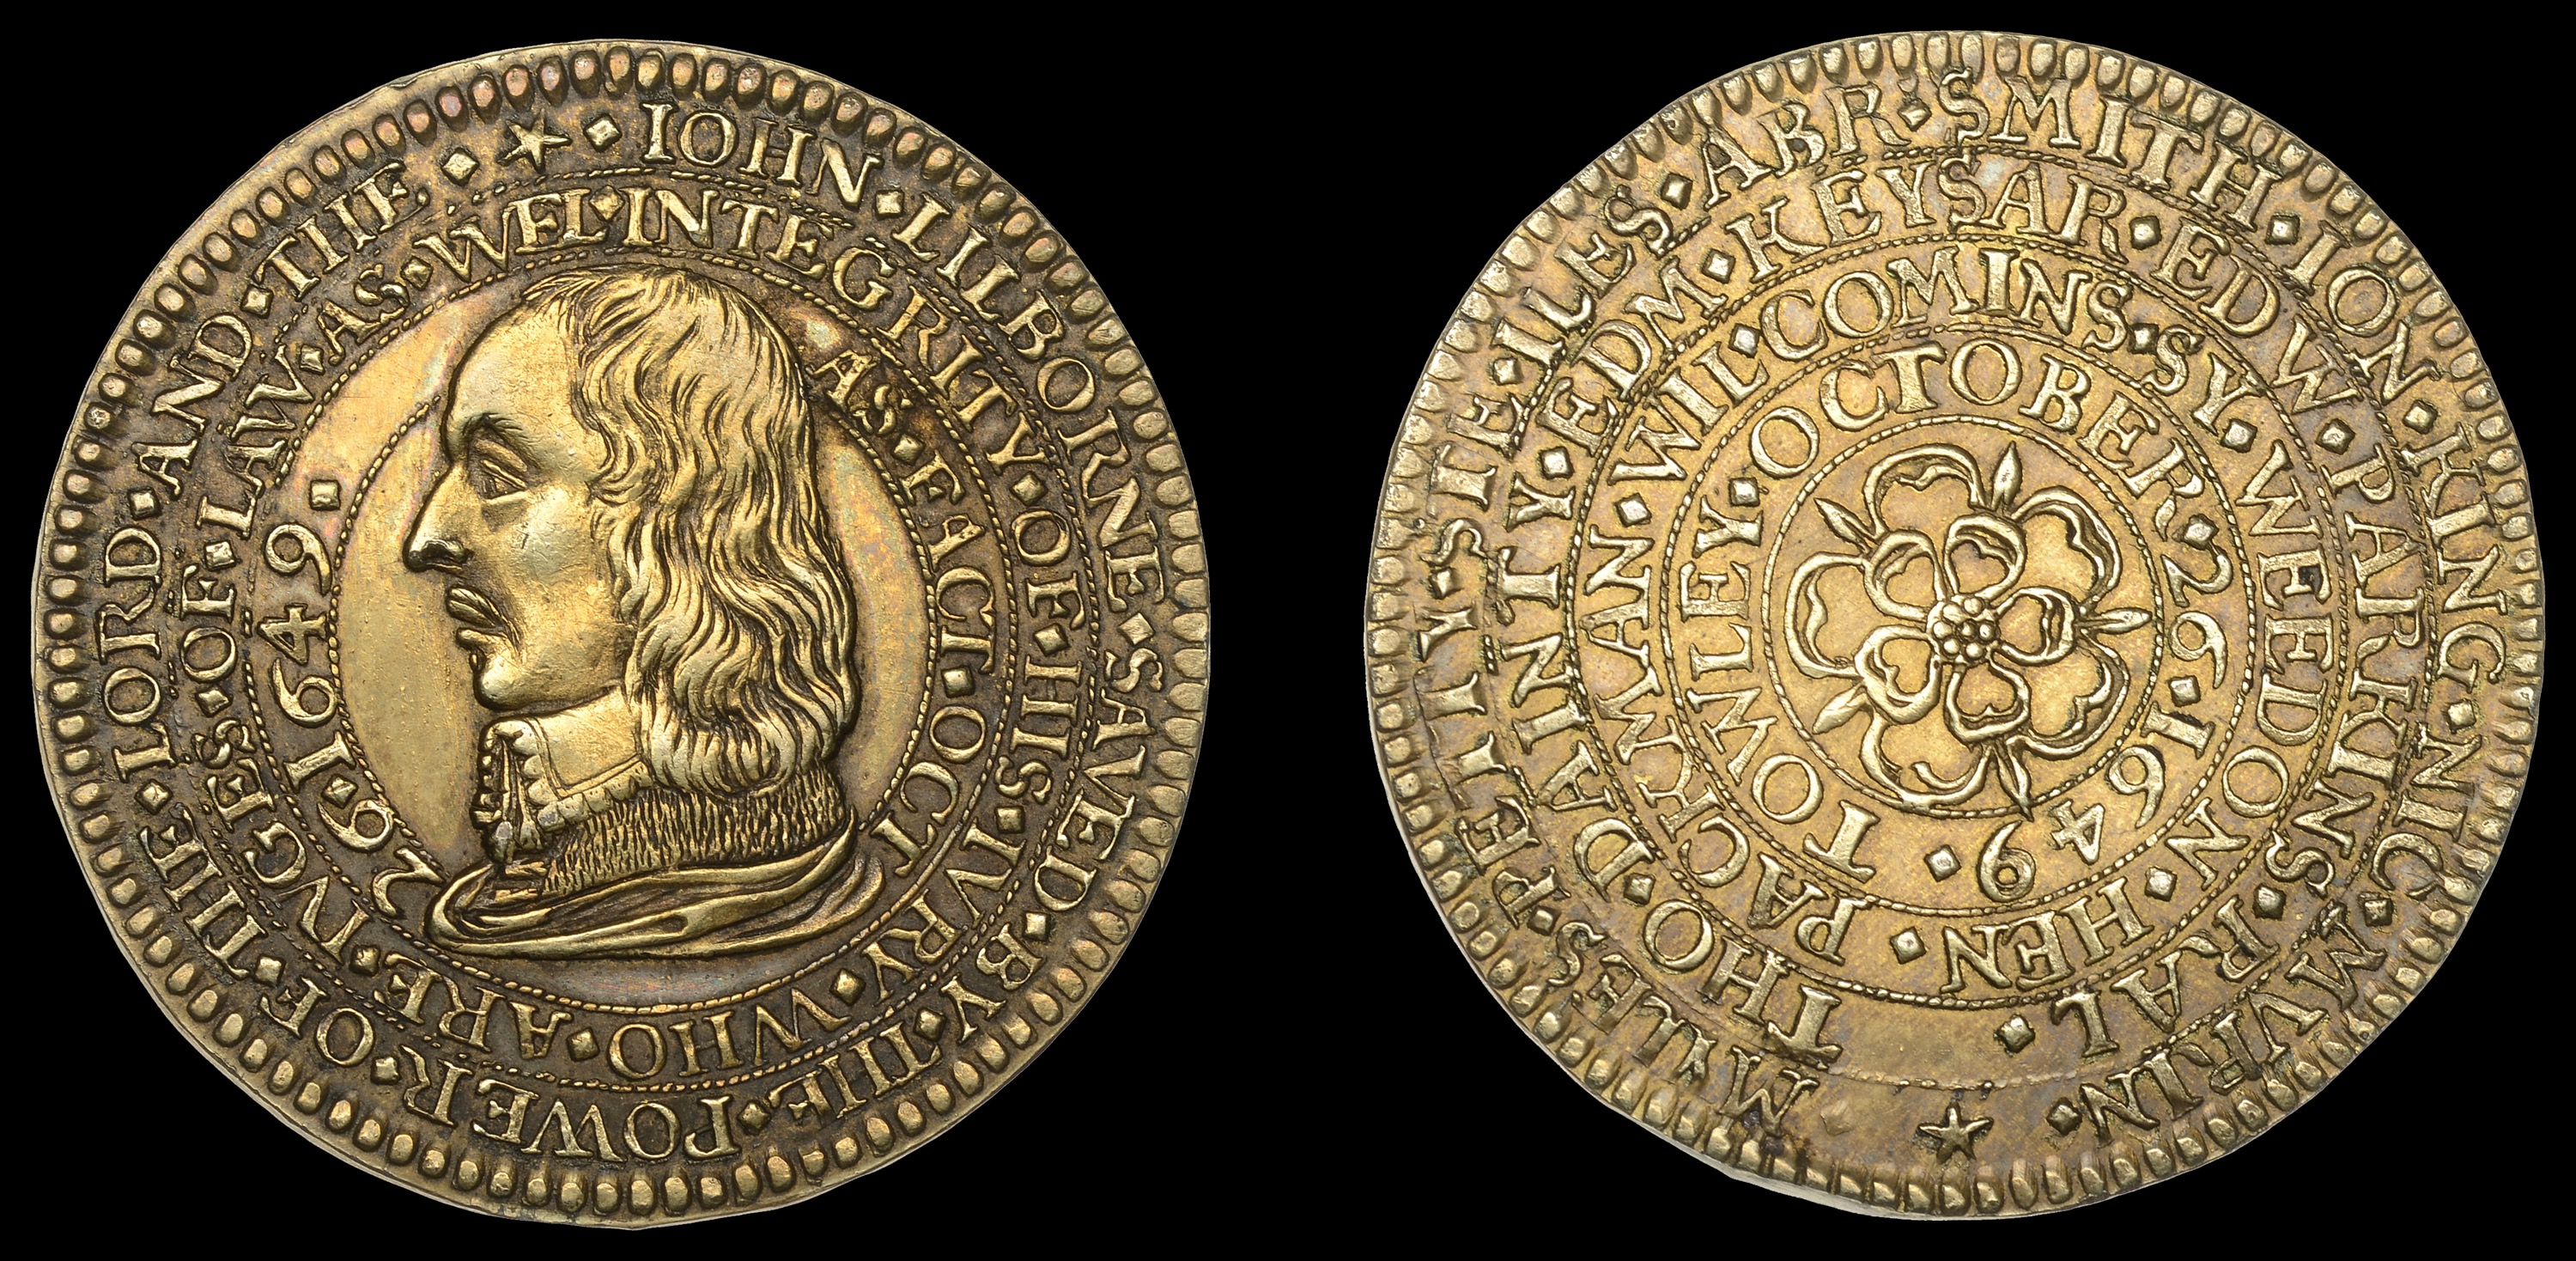 V: Original Medals by Simon, The Trial and Acquittal of John Lilburne, London, 1649, a struck